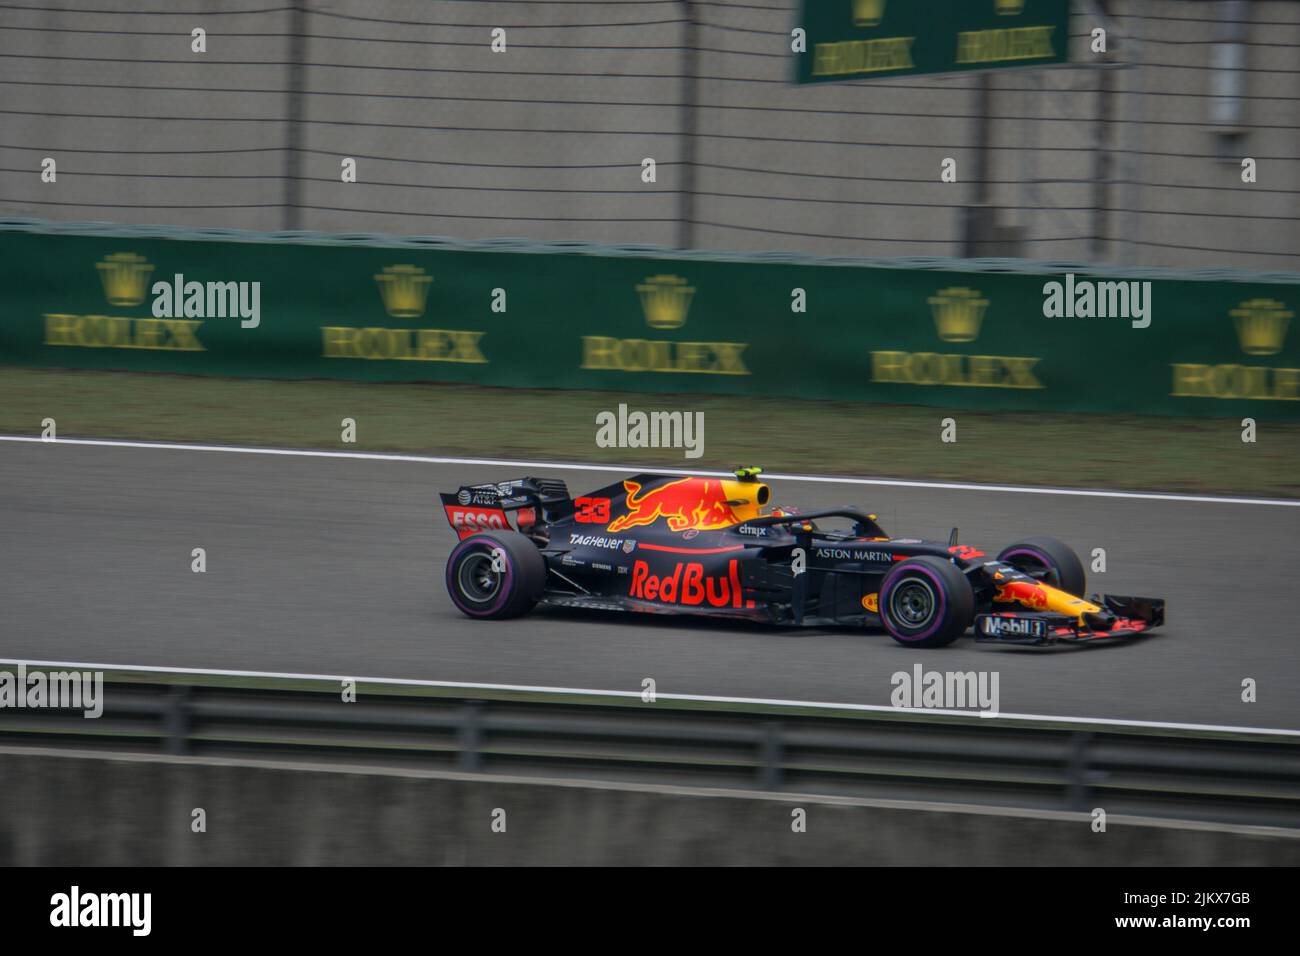 The 2018 Red Bull Racing F1 car in China between turns 15 and 16. The driver is Max Verstappen. Stock Photo